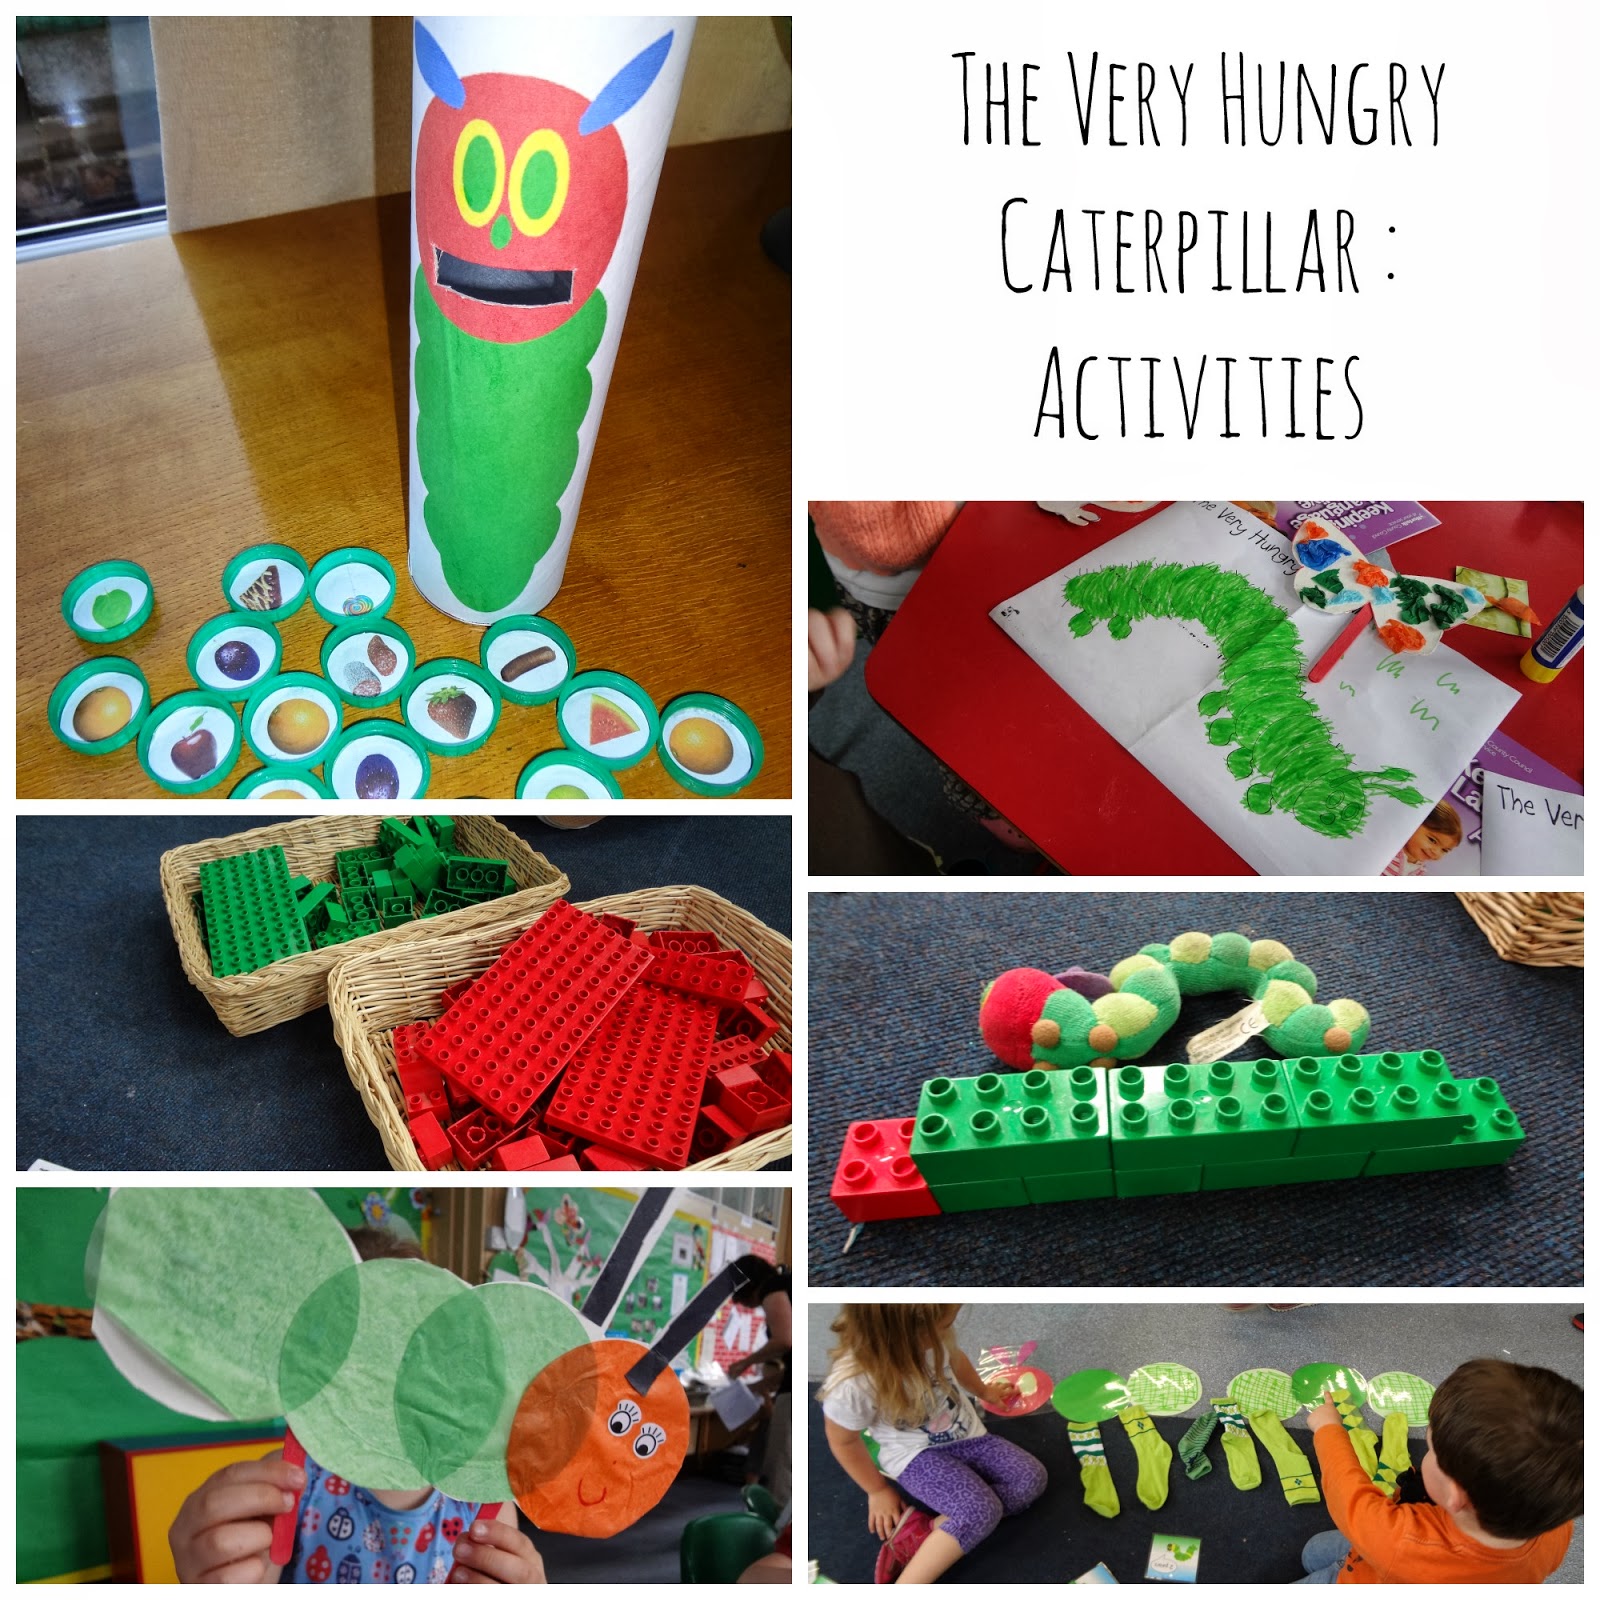 It's all about stories!: Activities | The Very Hungry Caterpillar